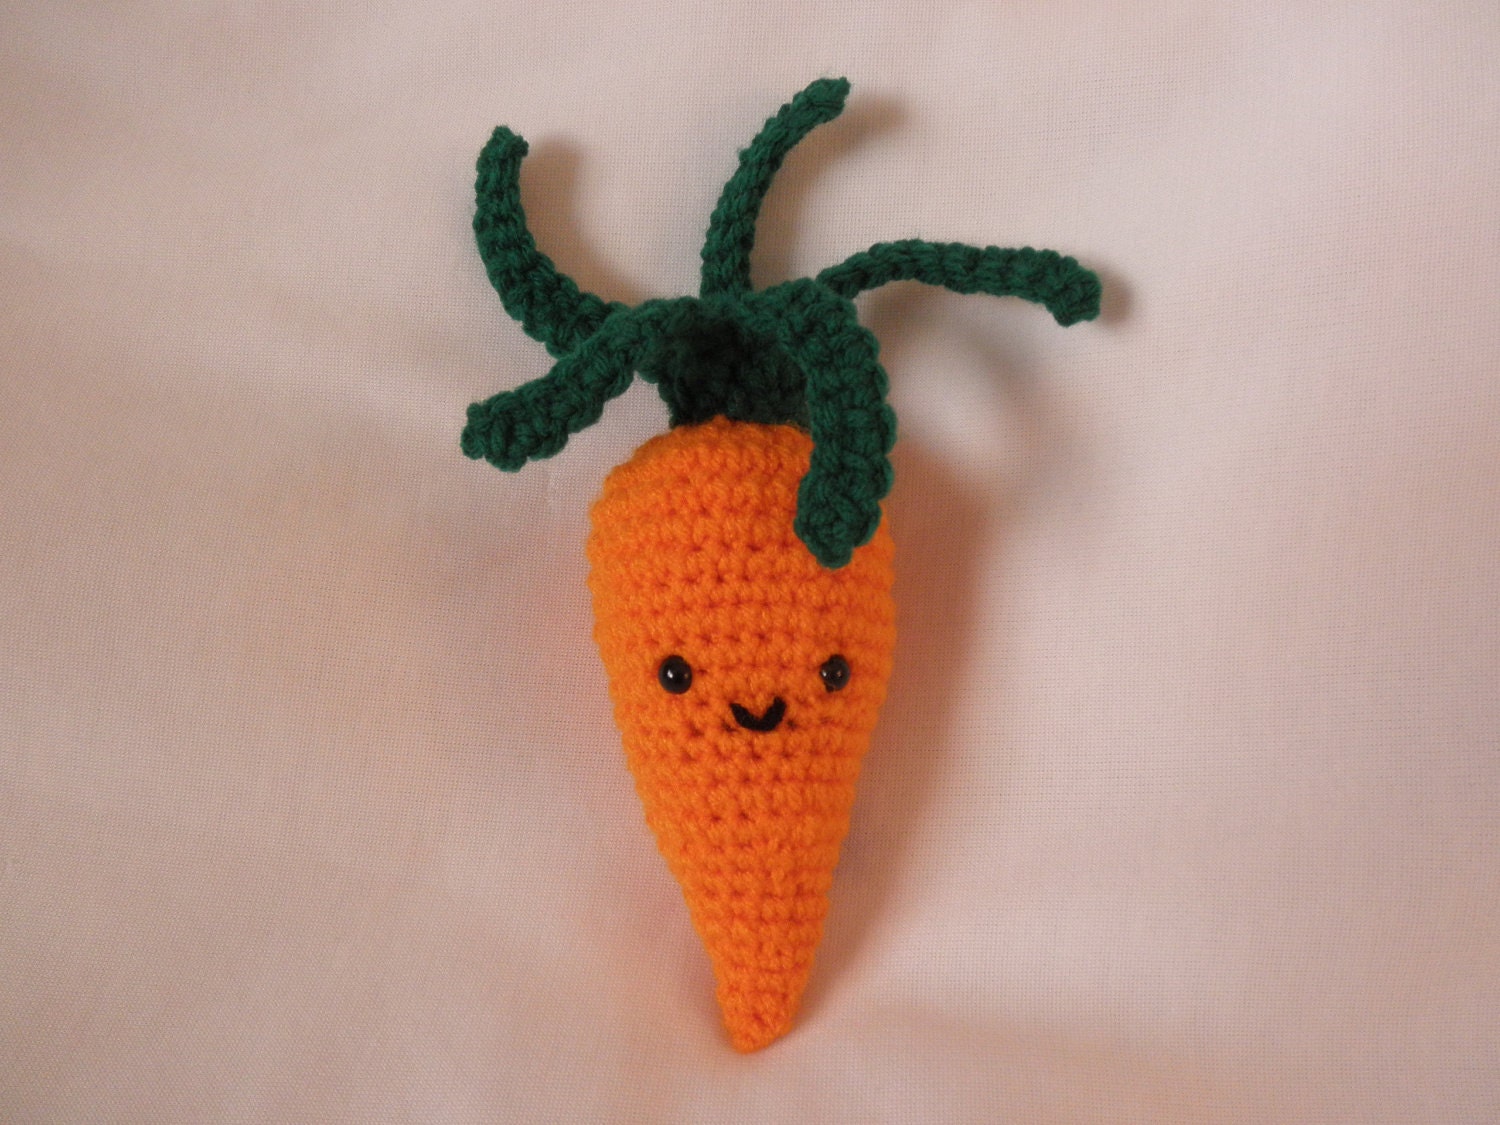 funny carrot